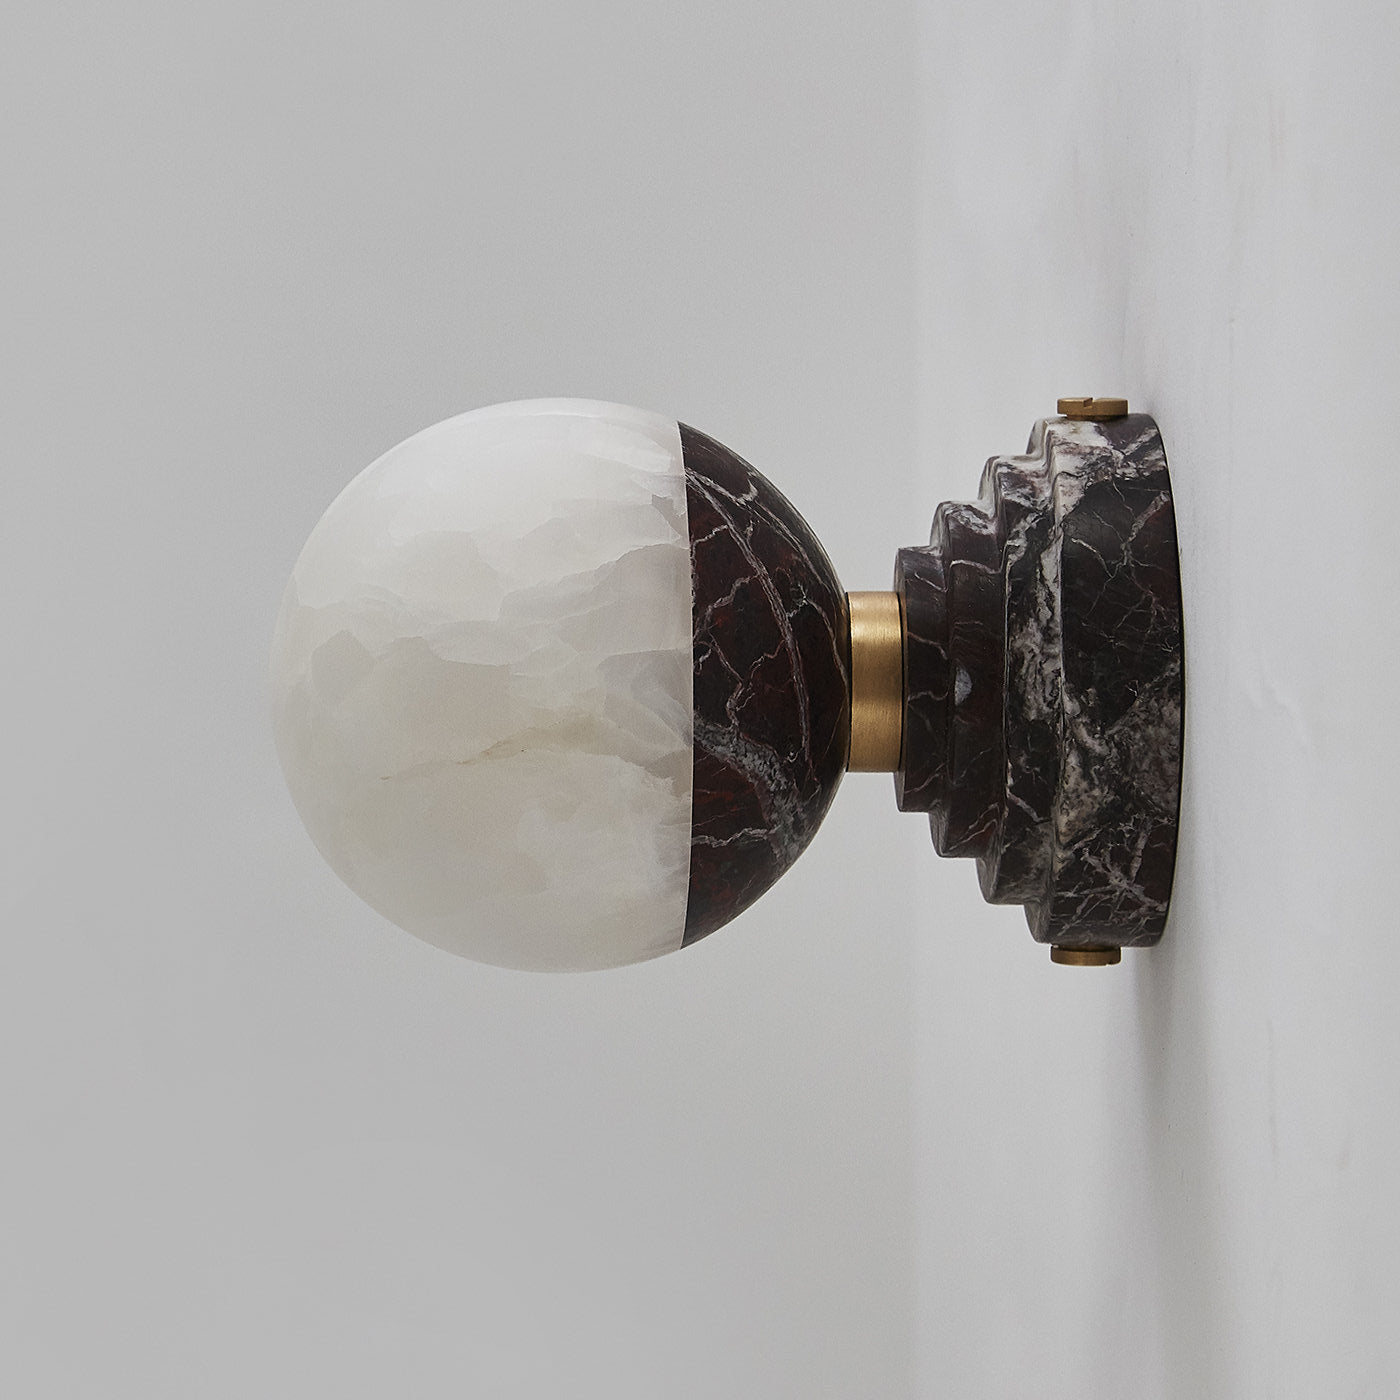 Lunar Sconce in Rosso Levanto Marble and Onyx  - Alternative view 2